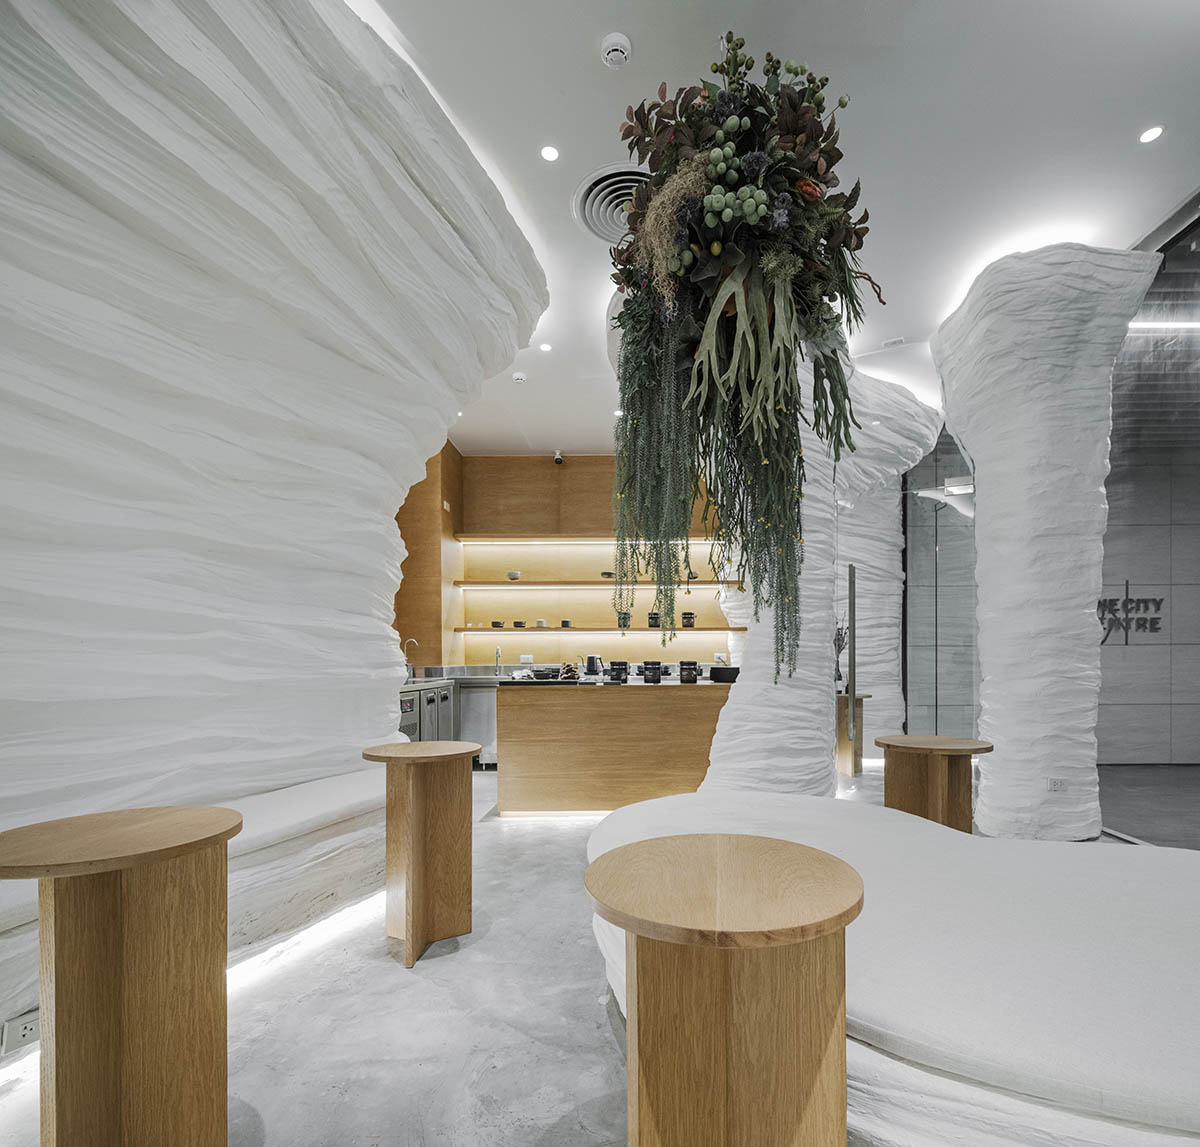 Juti architects creates surreal atmosphere for tea house within cave-like and textured walls 